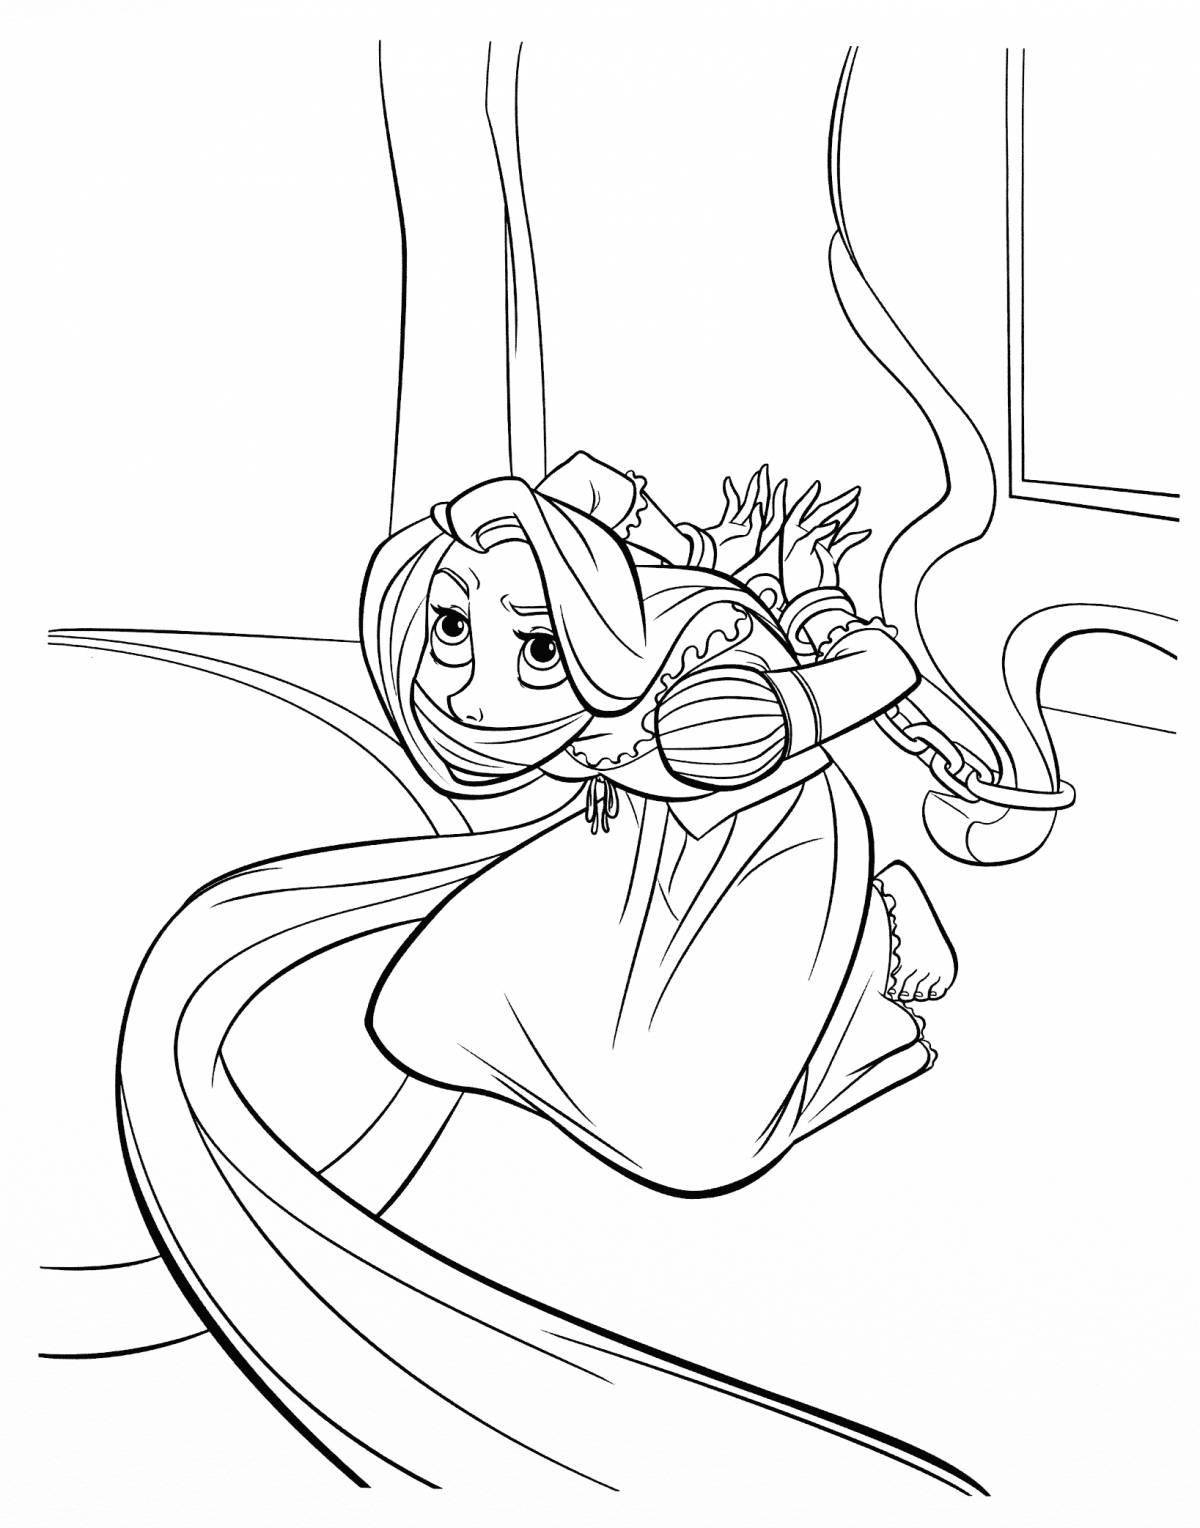 Rampant Rapunzel coloring book with clothes